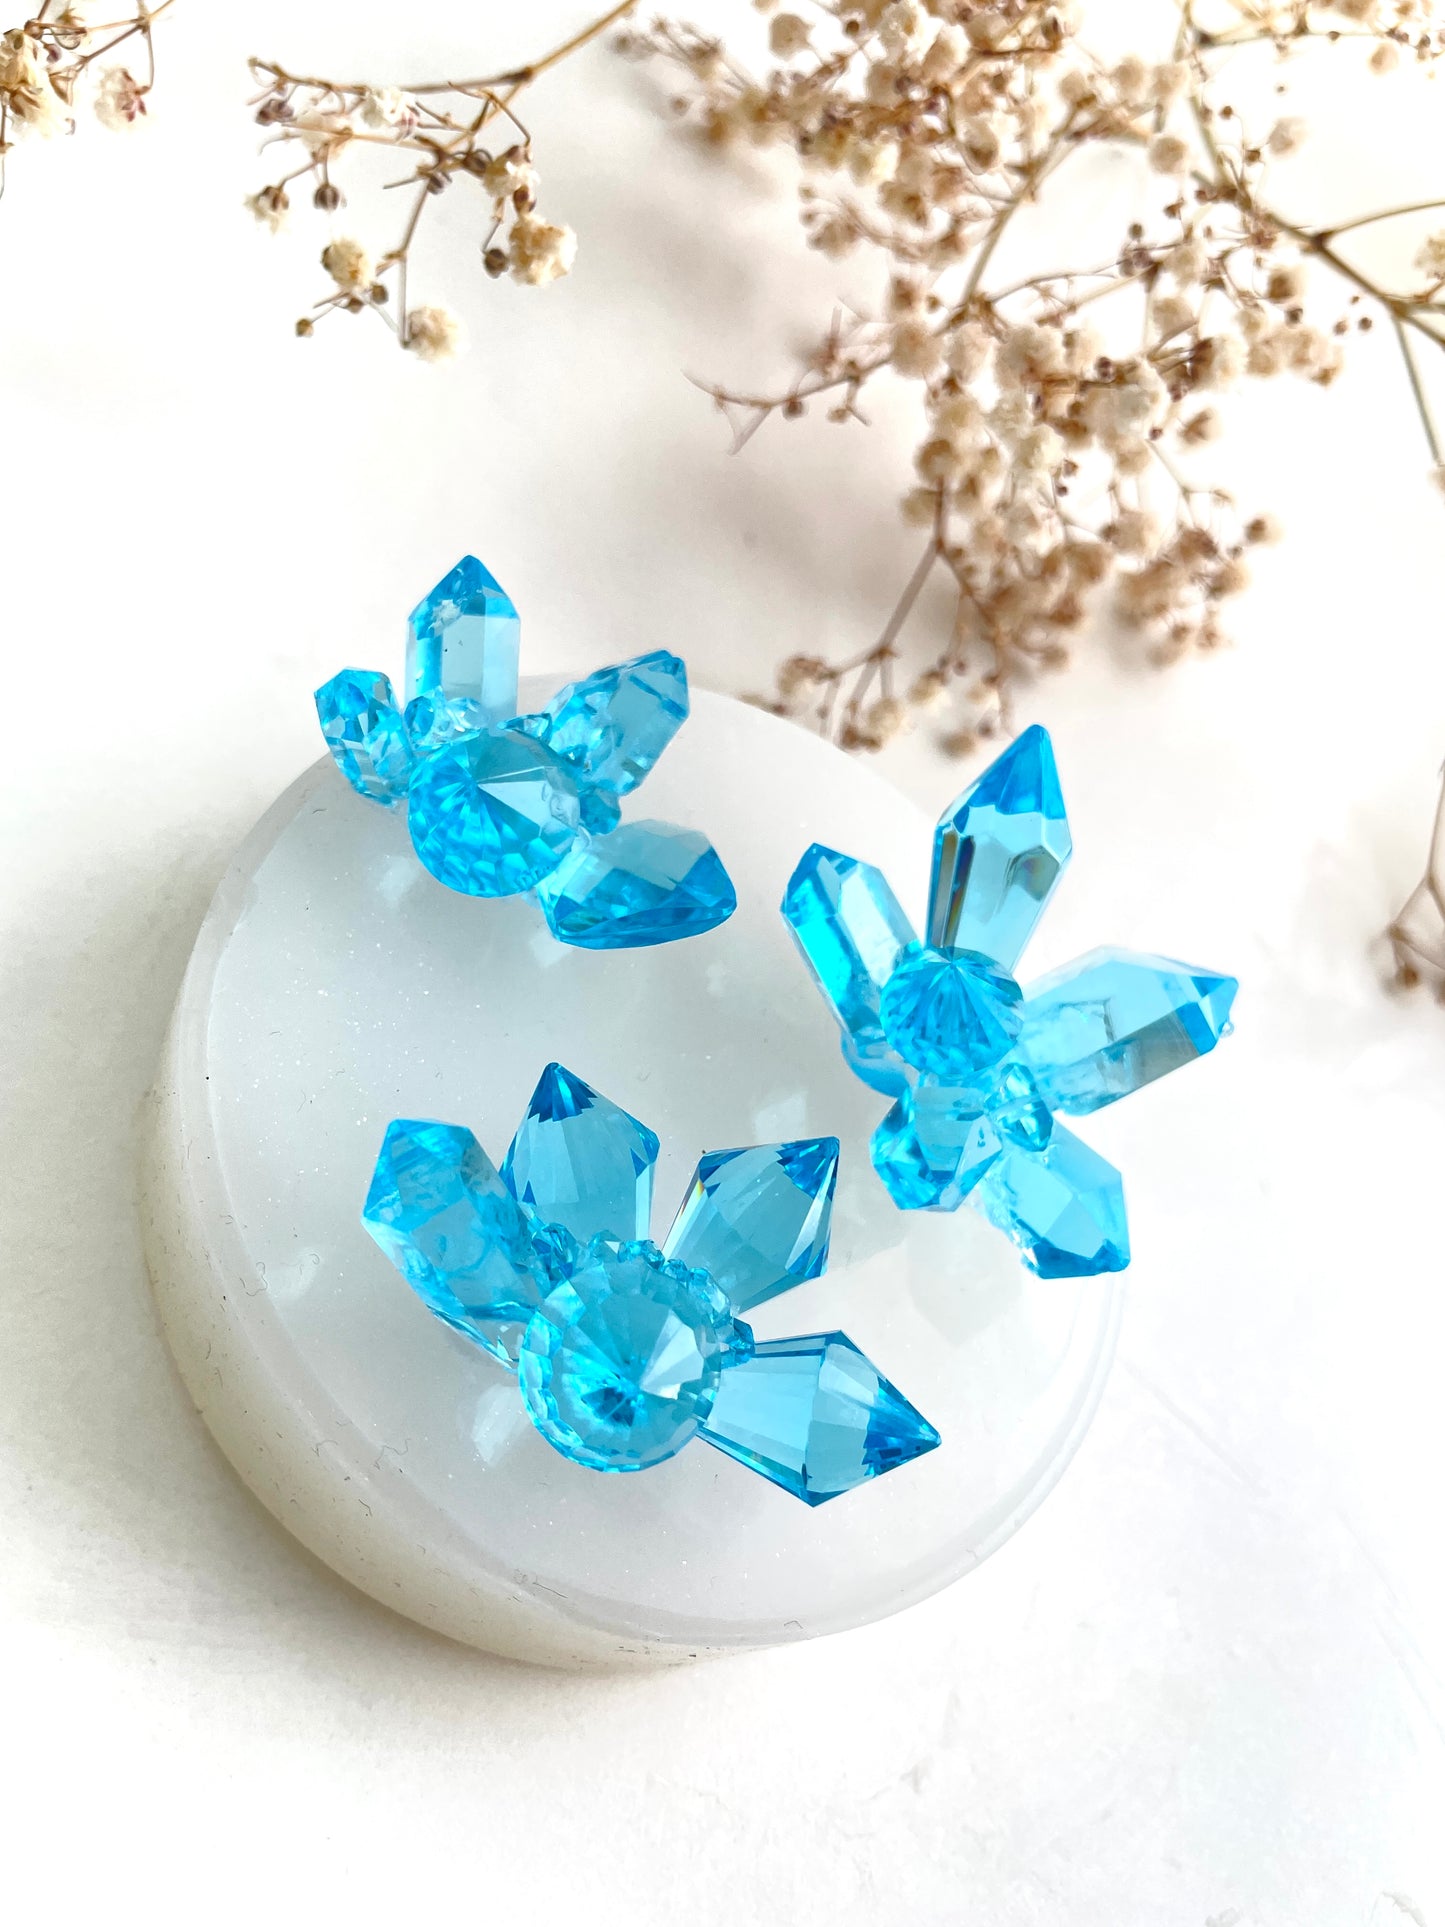 Create Stunning Resin Art with the 3 Little Crystals Silicone Mould